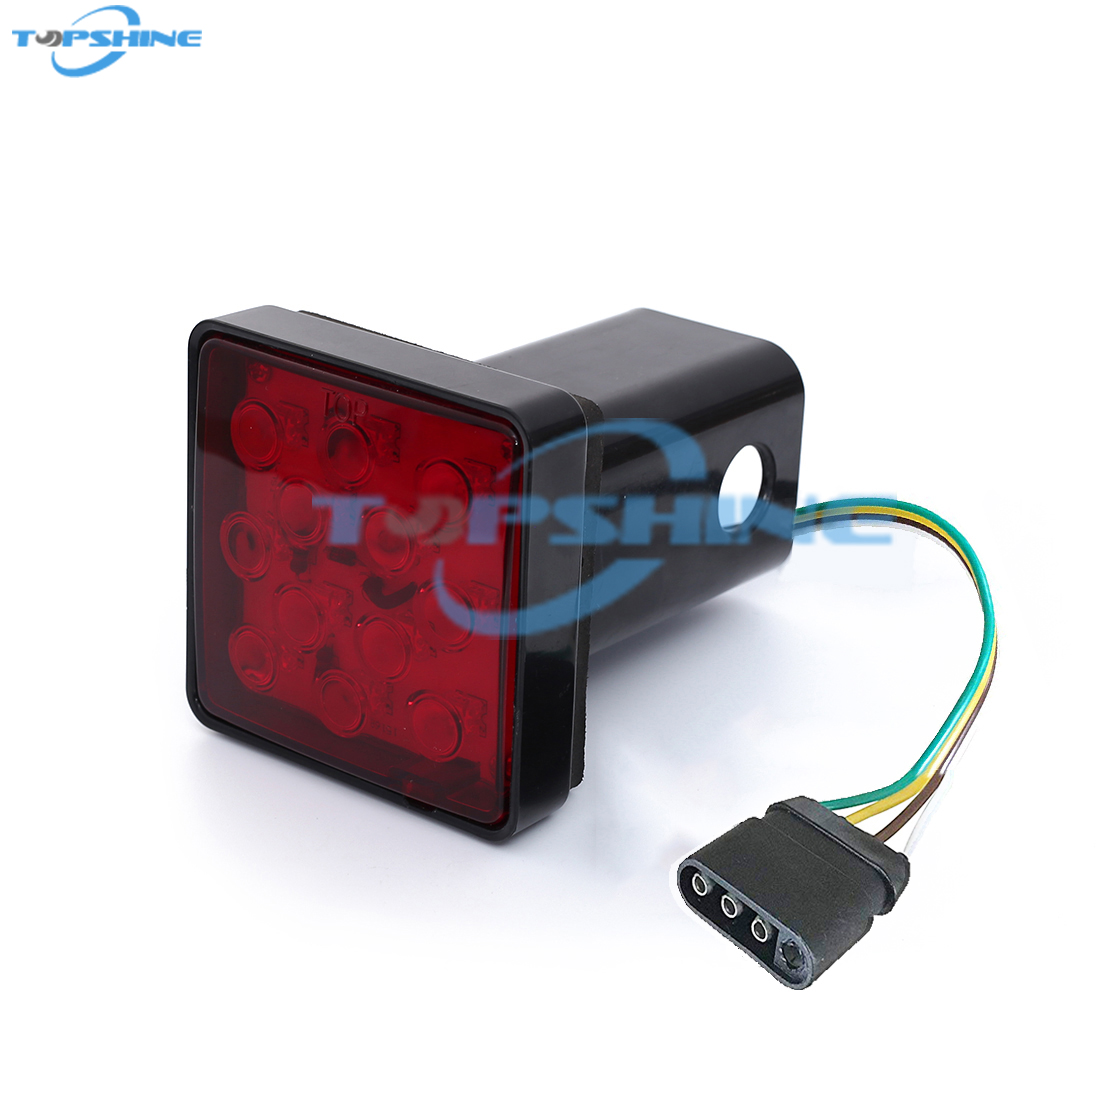 101005A LED Trailer Hitch Cover Brake Light Fit 2″ Receiver Featured Image